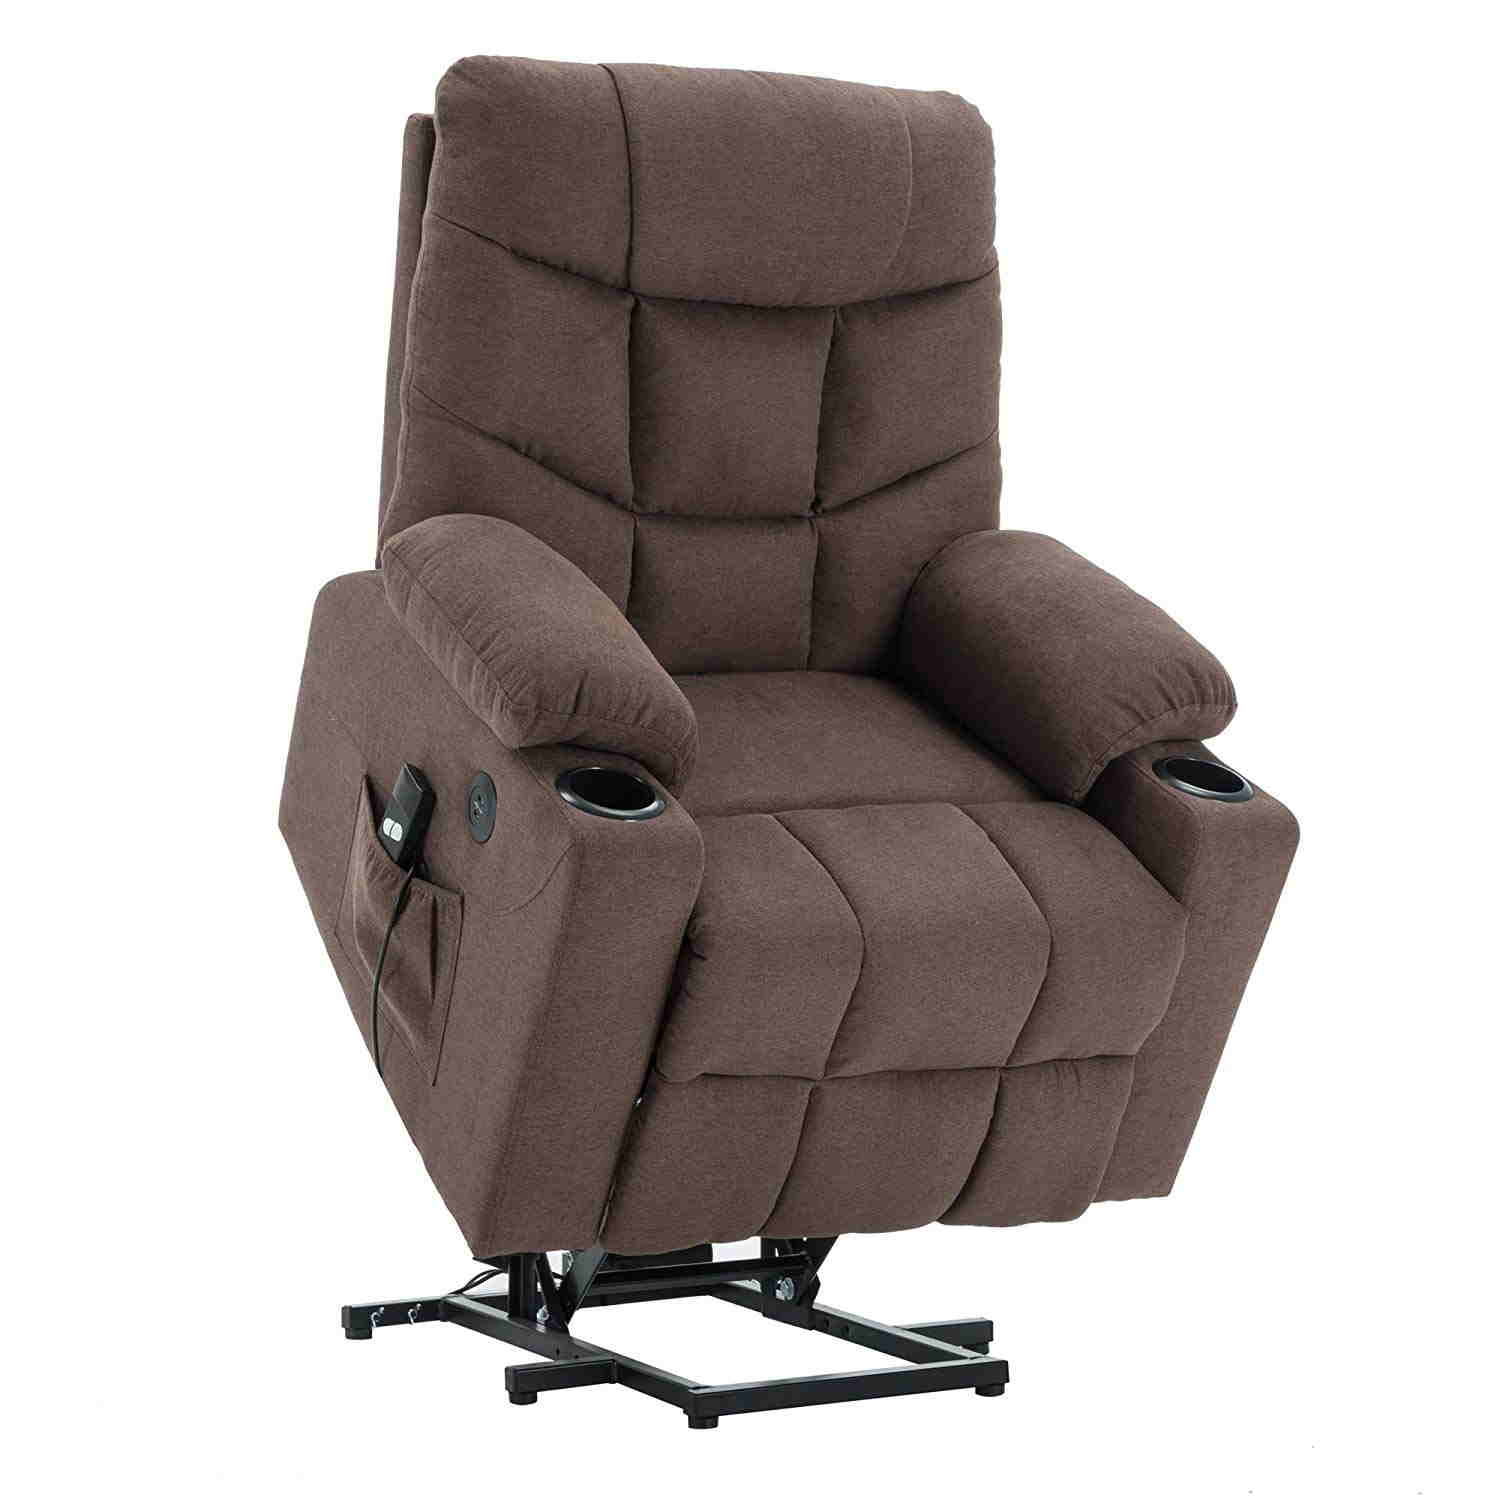 Top 10 Electric Recliner Chairs in 2020 Reviews & Guide • Recliners Guide